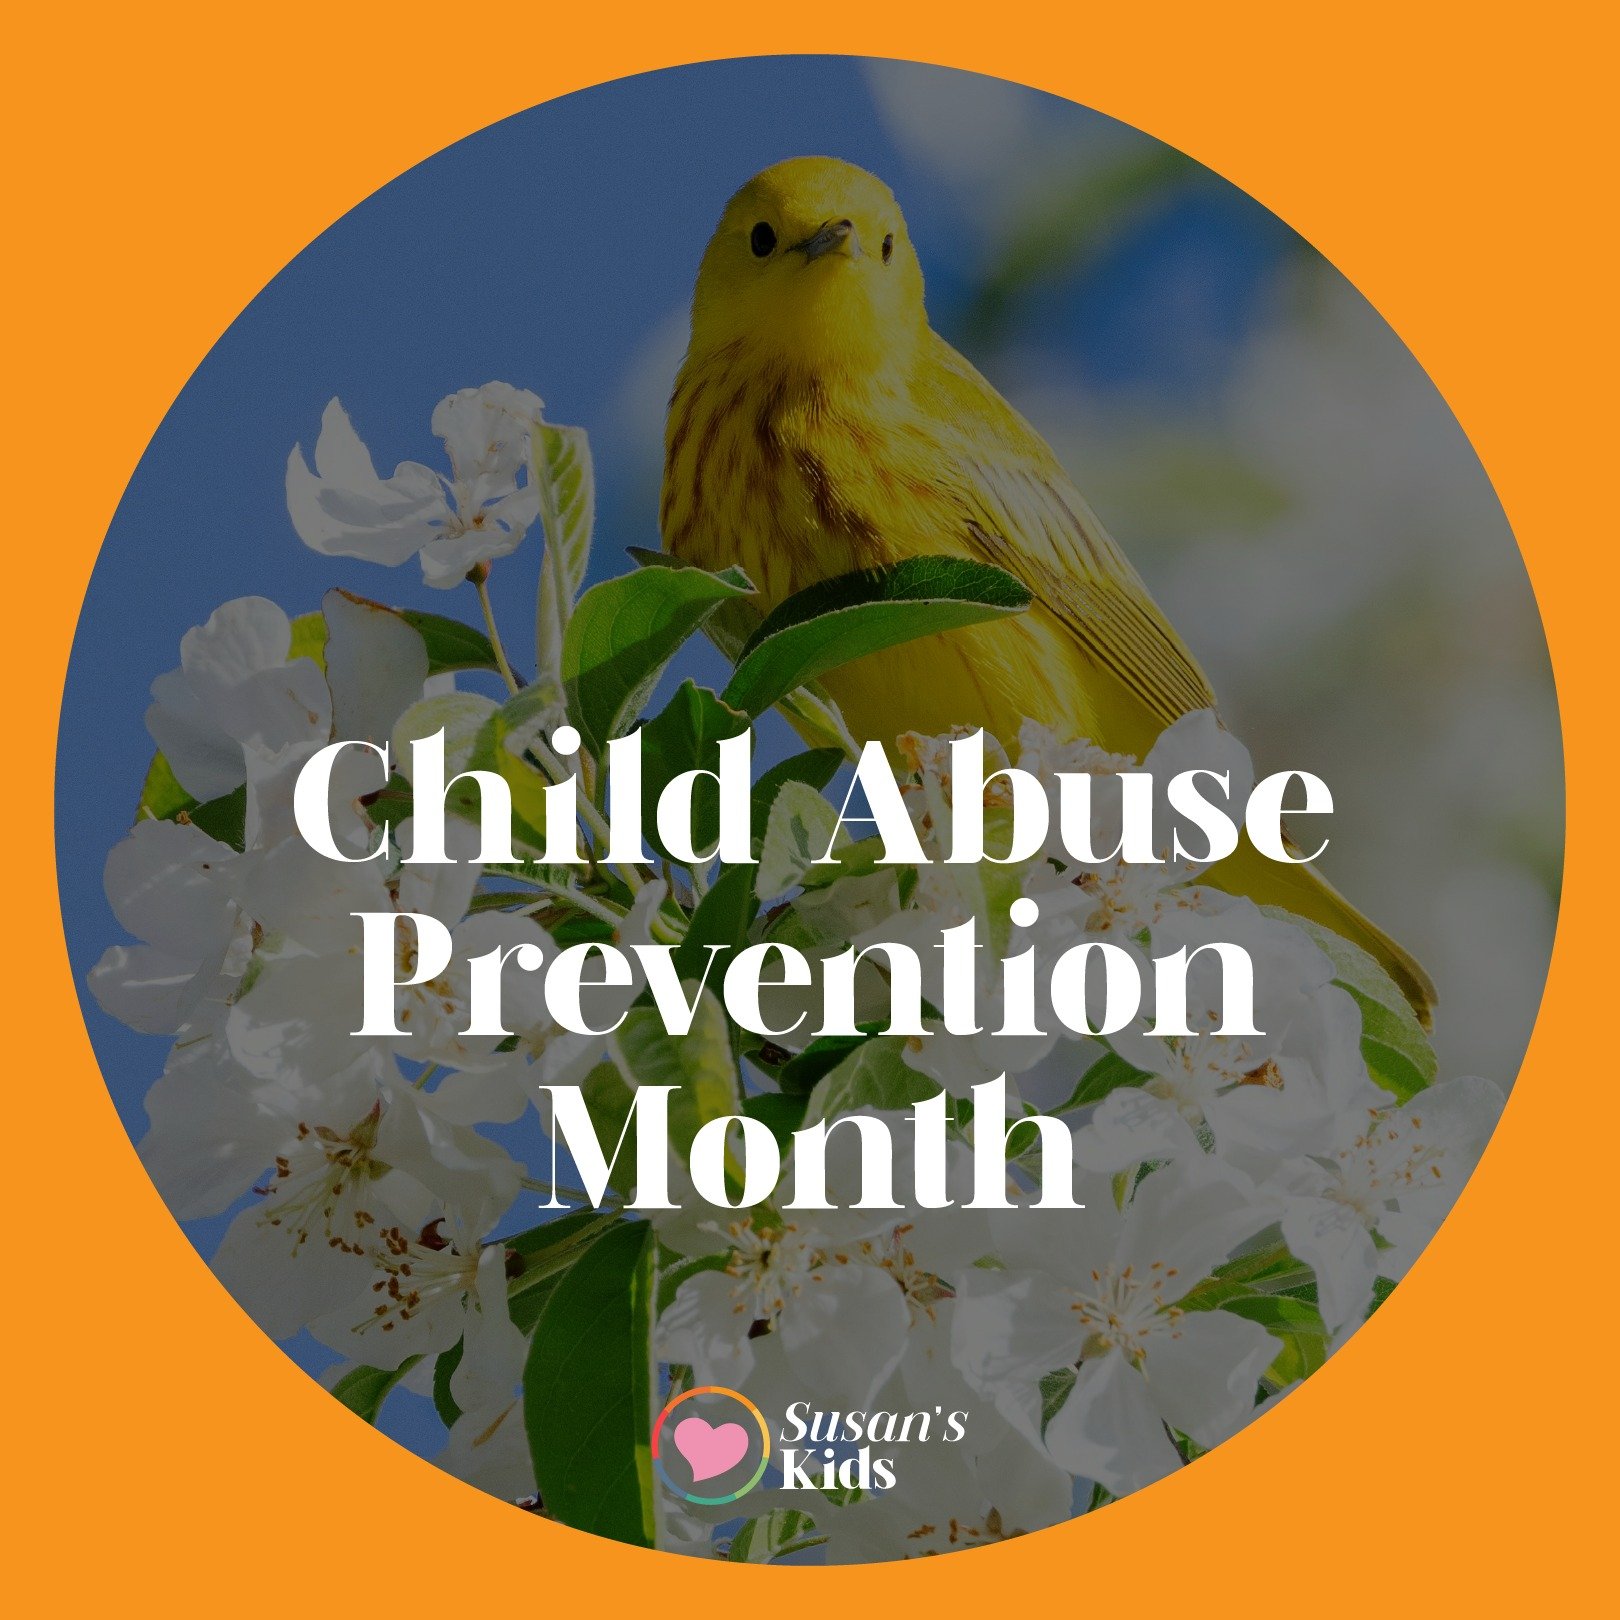 💙 April showers bring May flowers, but they also bring attention to important causes. As we recognize Child Abuse Prevention Month this April, let's not forget the children in foster care who are especially susceptible to abuse and neglect. 

By sup